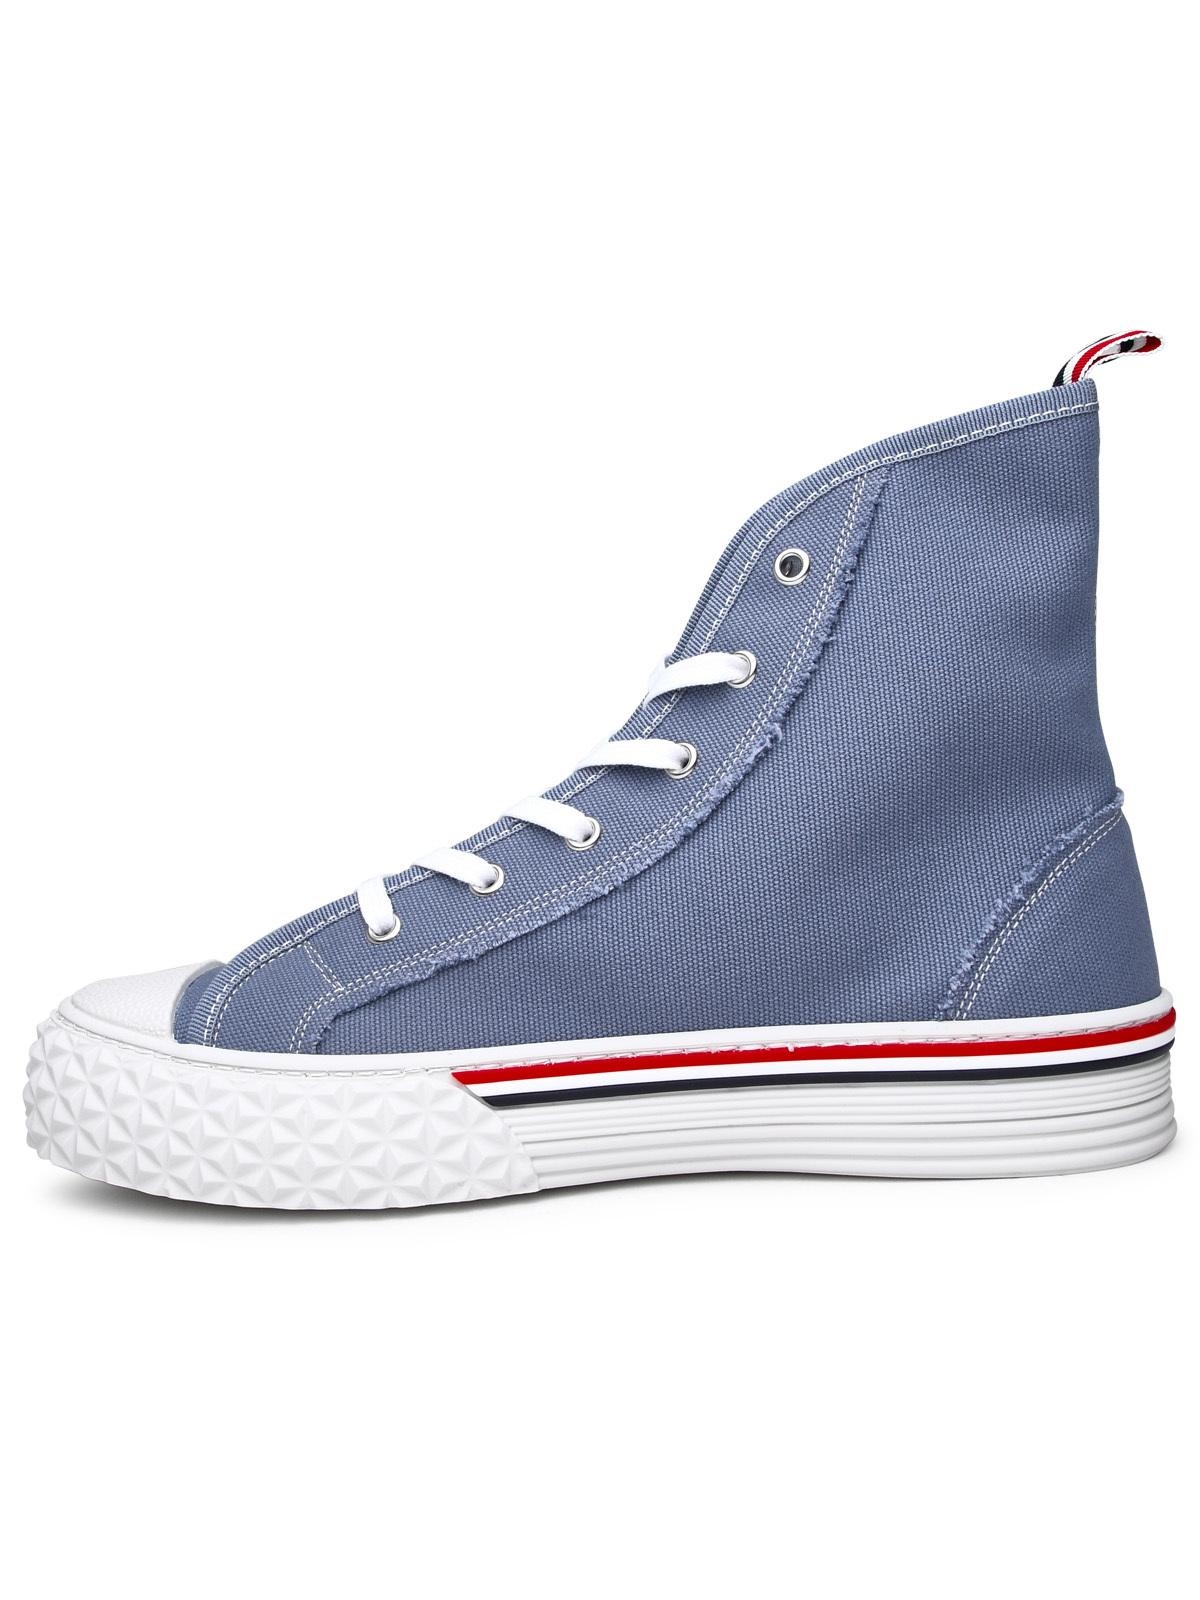 Thom Browne Sneakers In Light Blue Canvas Man - 3